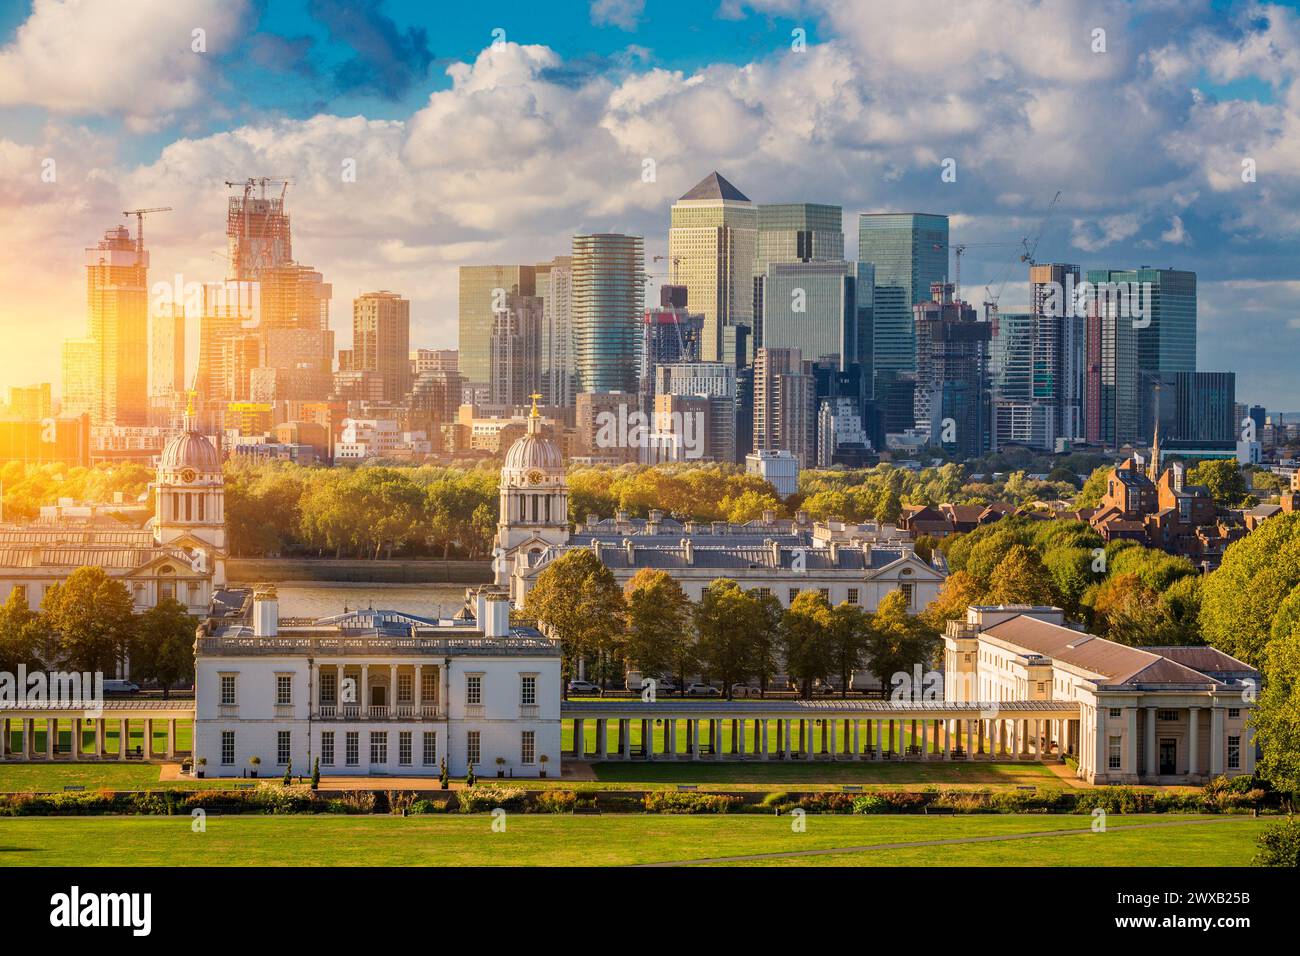 London at Sunset Light, England,  Skyline View Of Greenwich College and Canary Wharf At Golden Hour Sunset With Blue Sky And Clouds Stock Photo